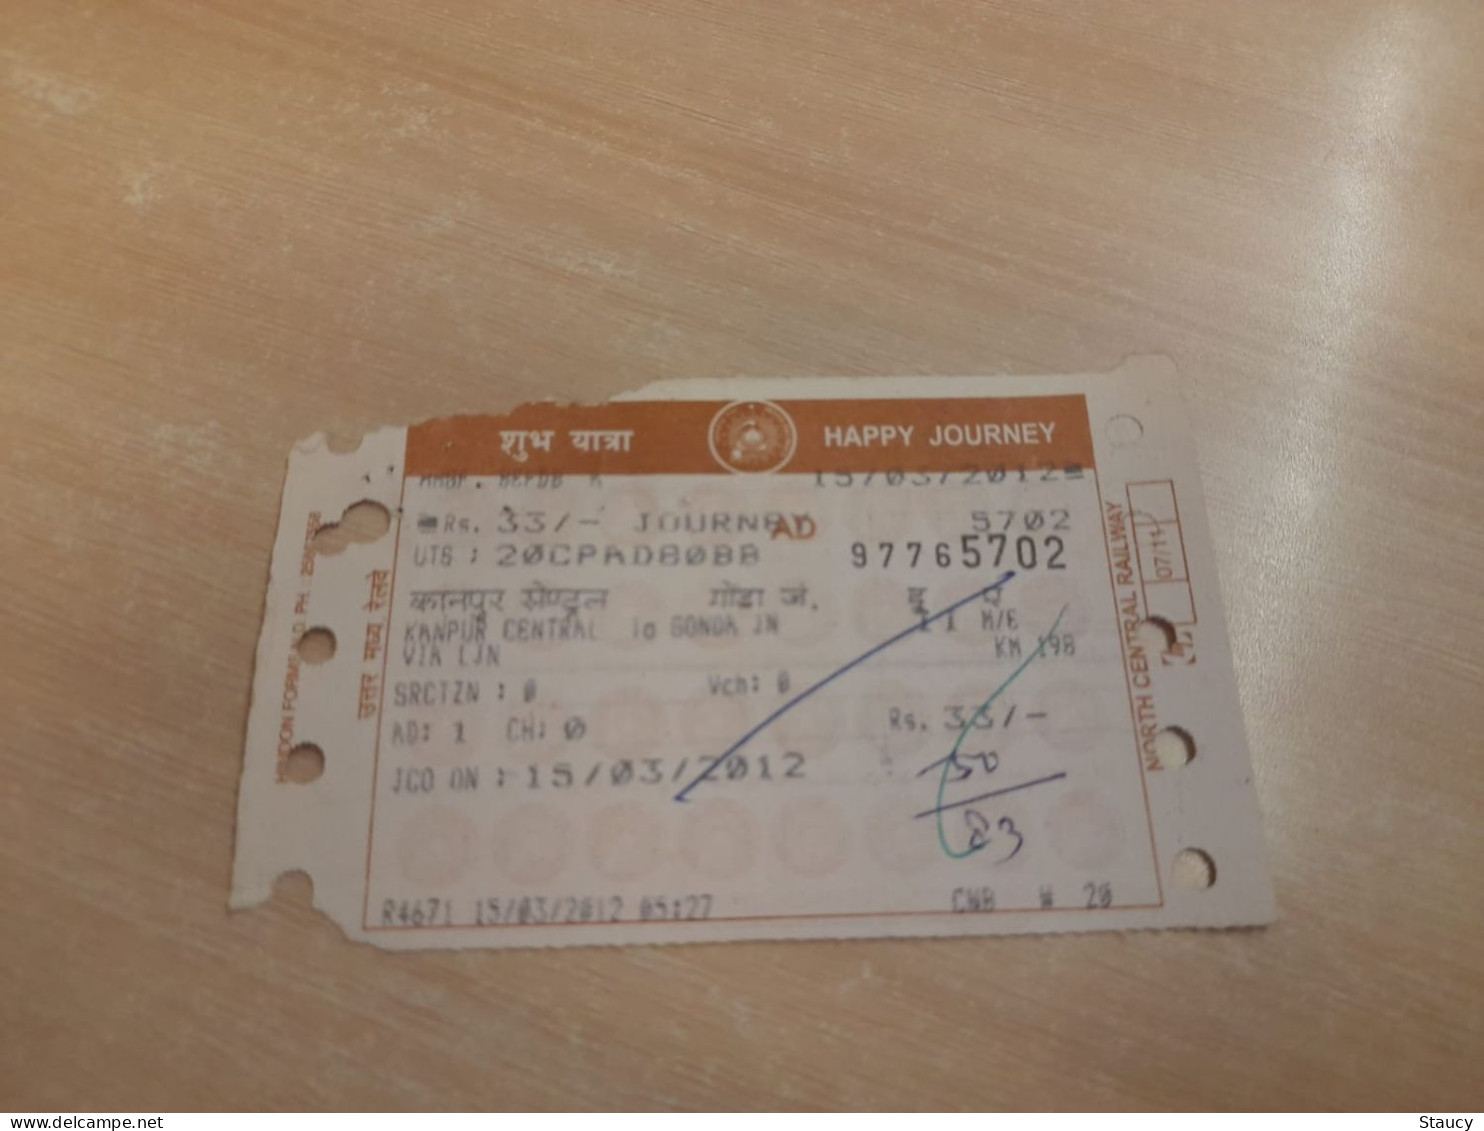 India Old / Vintage - Railway / Train Ticket "NORTH CENTRAL RAILWAY" As Per Scan - Welt